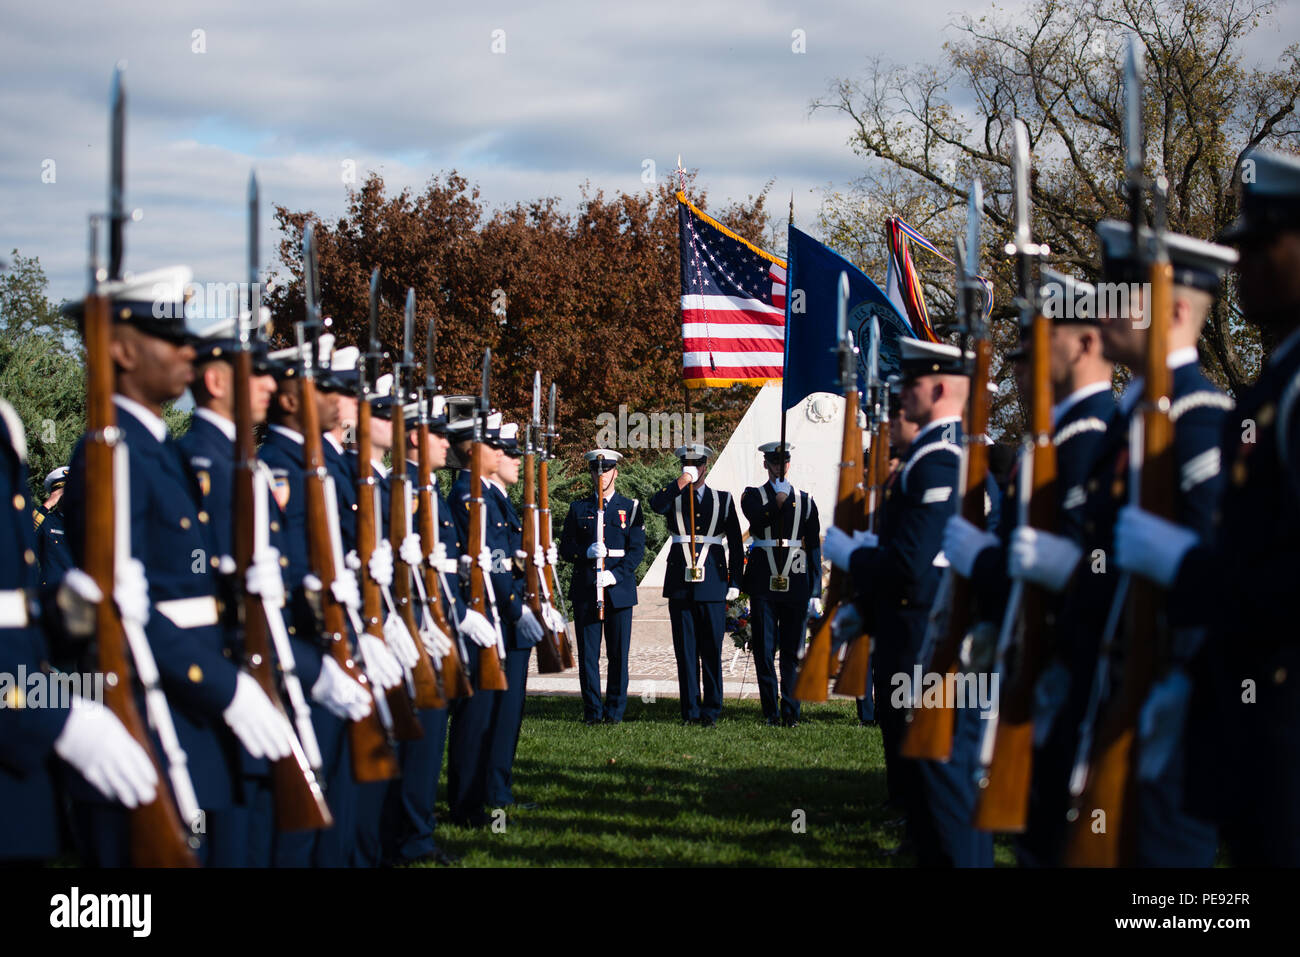 Members of the U.S. Coast Guard Ceremonial Honor Guard participate in wreath-laying ceremony at the Coast Guard Memorial at Arlington National Cemetery, Nov. 11, 2015, in Arlington, Va. Members of the U.S. Coast Guard laid a wreath at the memorial during a ceremony on Veterans Day. (U.S. Army photo by Rachel Larue/Arlington National Cemetery/released) Stock Photo